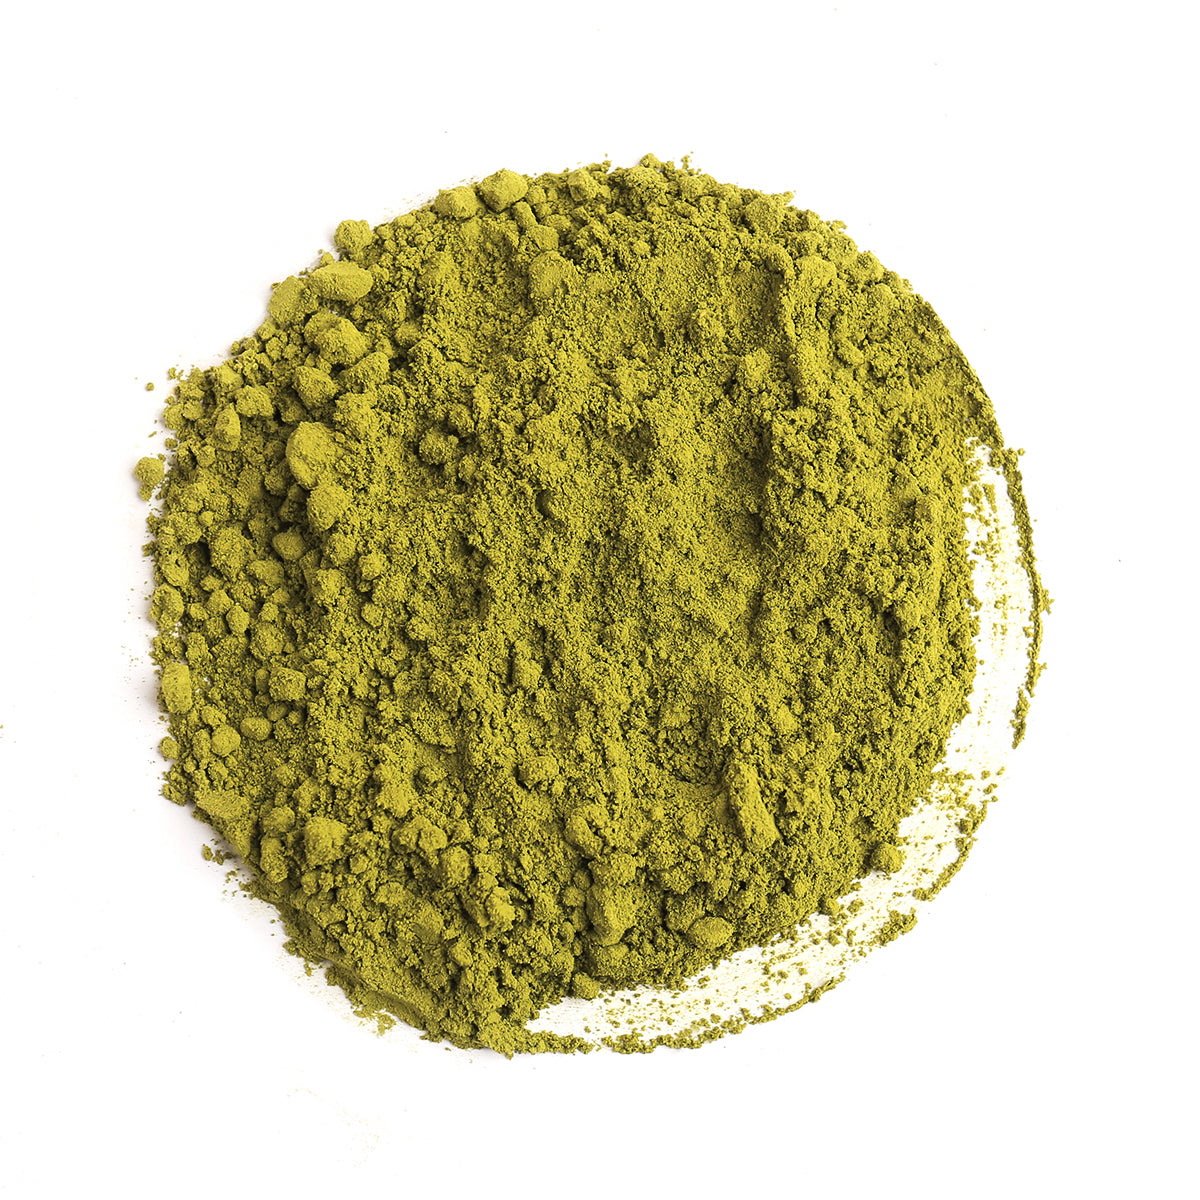 Can Matcha Tea Really Help with Weight Loss?